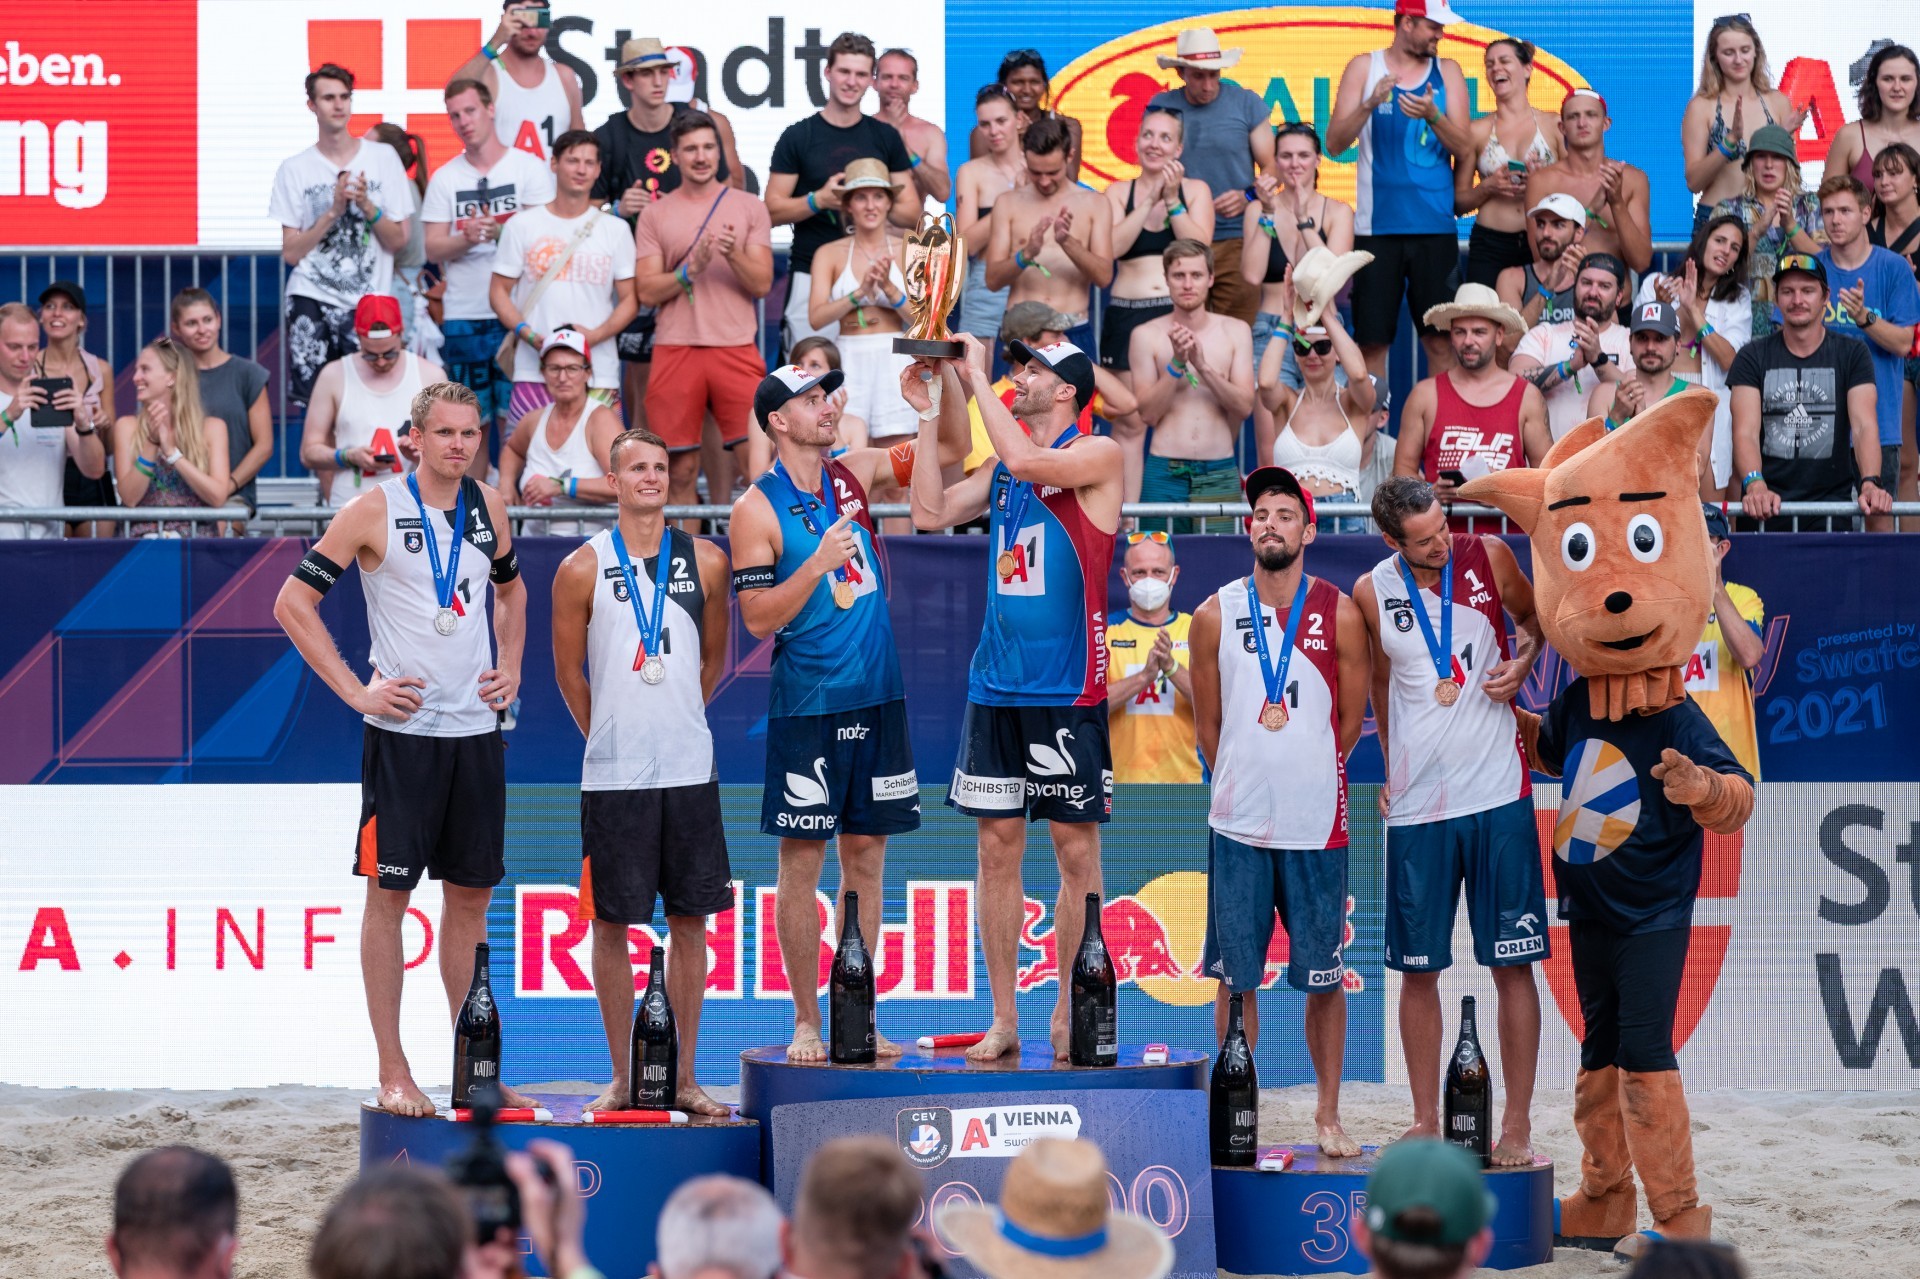 Unlike the Olympics, players were able to feel the warmth of the fans when awarded their medals